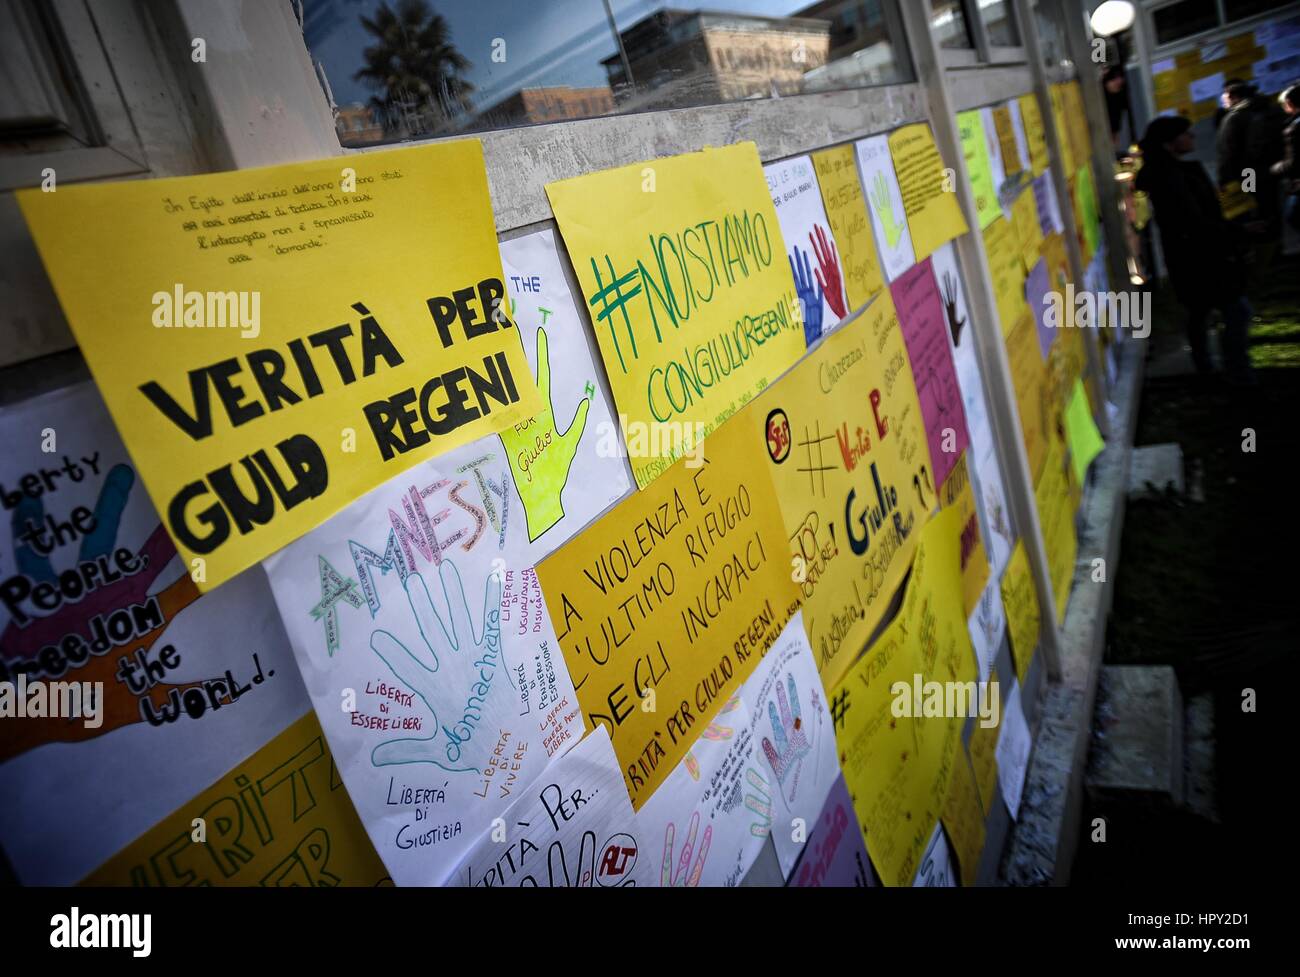 Manifestation of Amnesty International at the University La Sapienza, one year after the death of Julius Regeni  Where: Rome, Italy When: 25 Jan 2017 Credit: IPA/WENN.com  **Only available for publication in UK, USA, Germany, Austria, Switzerland** Stock Photo